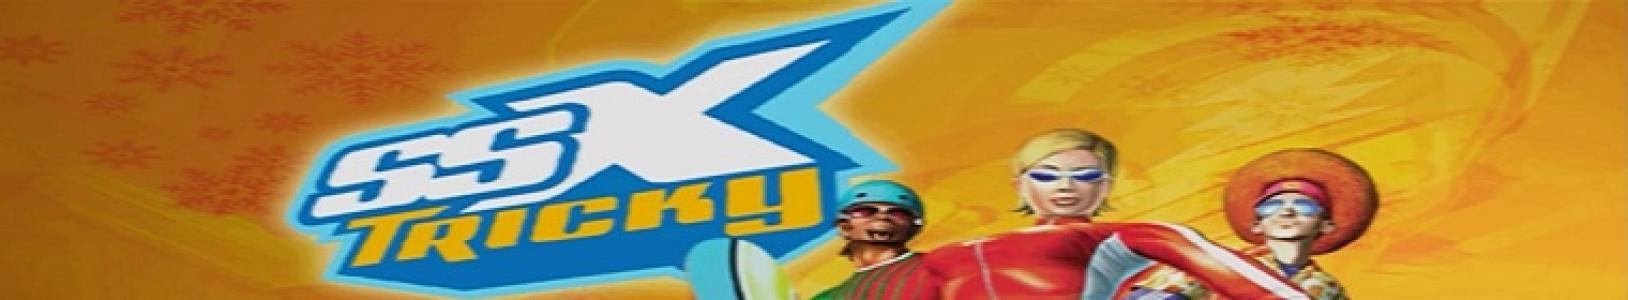 SSX Tricky banner